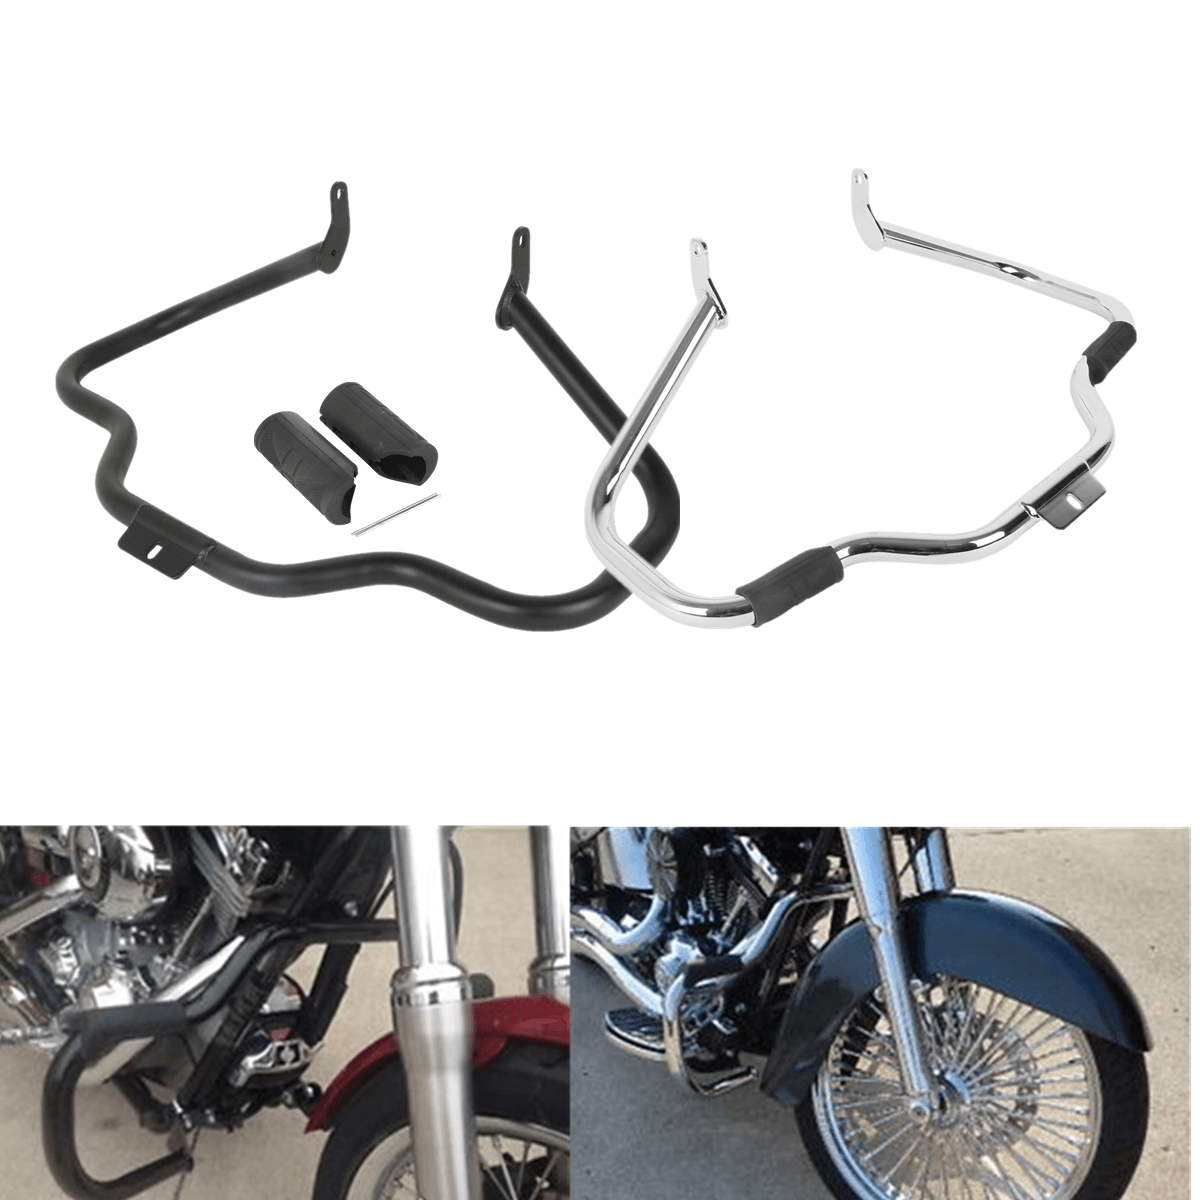 Mustache Engine Guard Crash Bar 1 1/4 Foot Pegs Fit For Harley Softail 2000-2017 - Moto Life Products